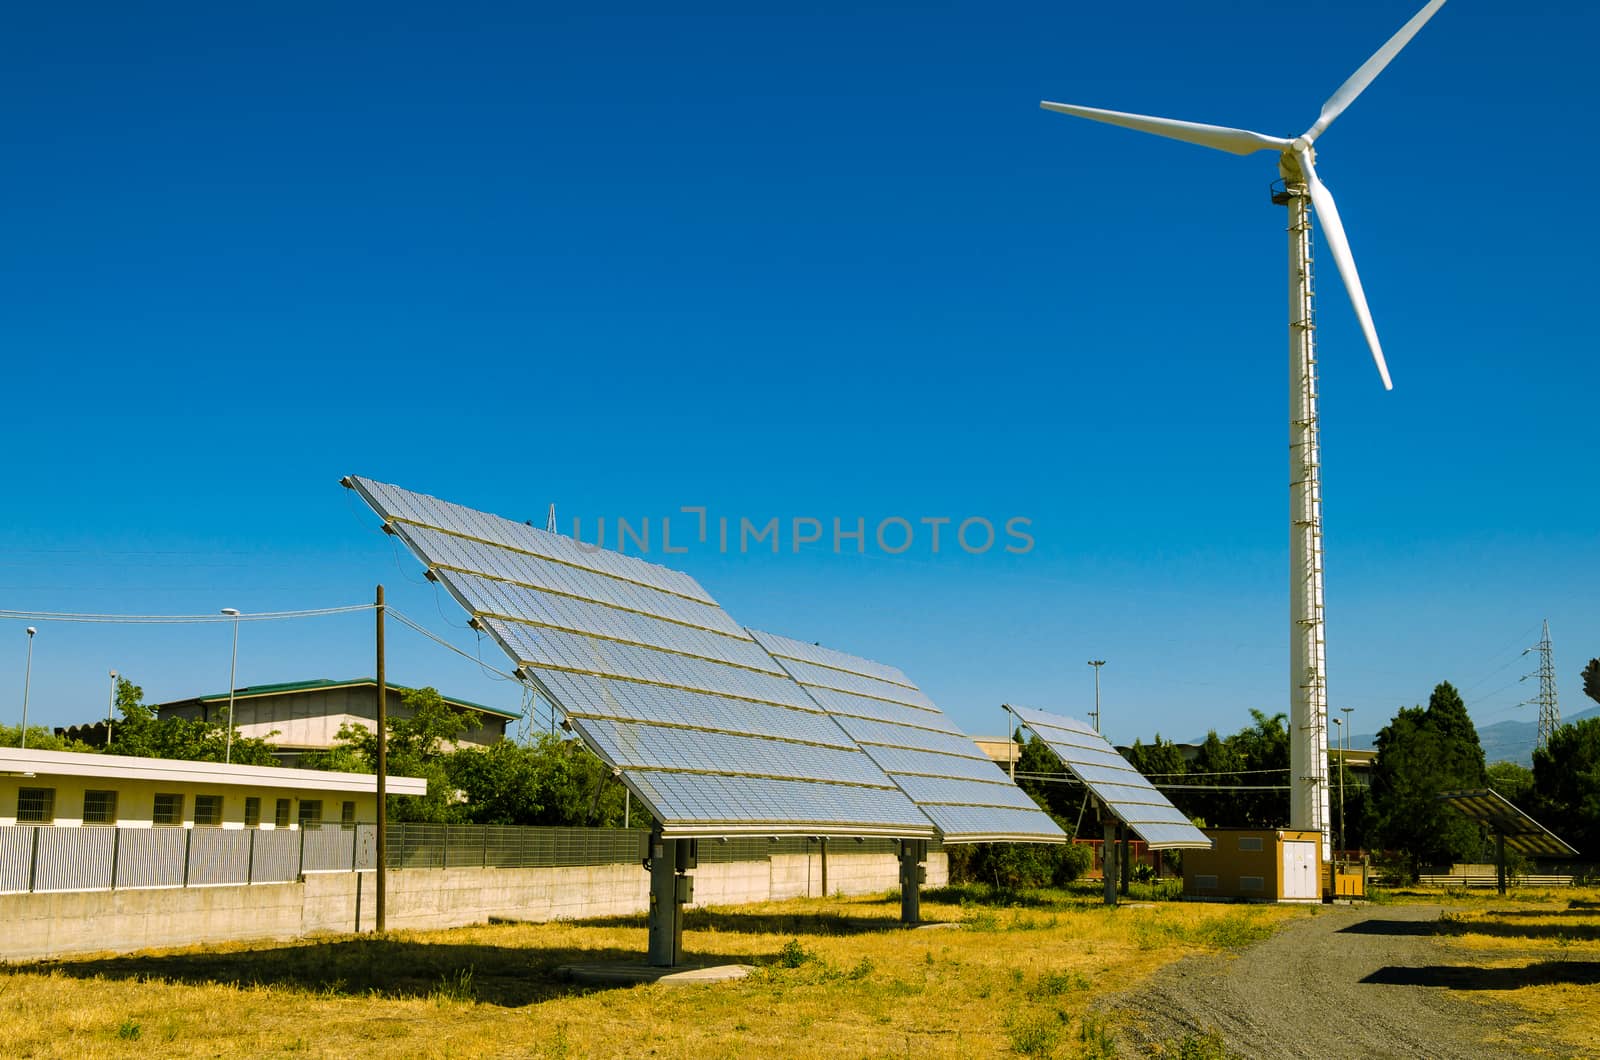 Solar panel and Wind turbine produces green, enviromentaly friendly energy from the sun.